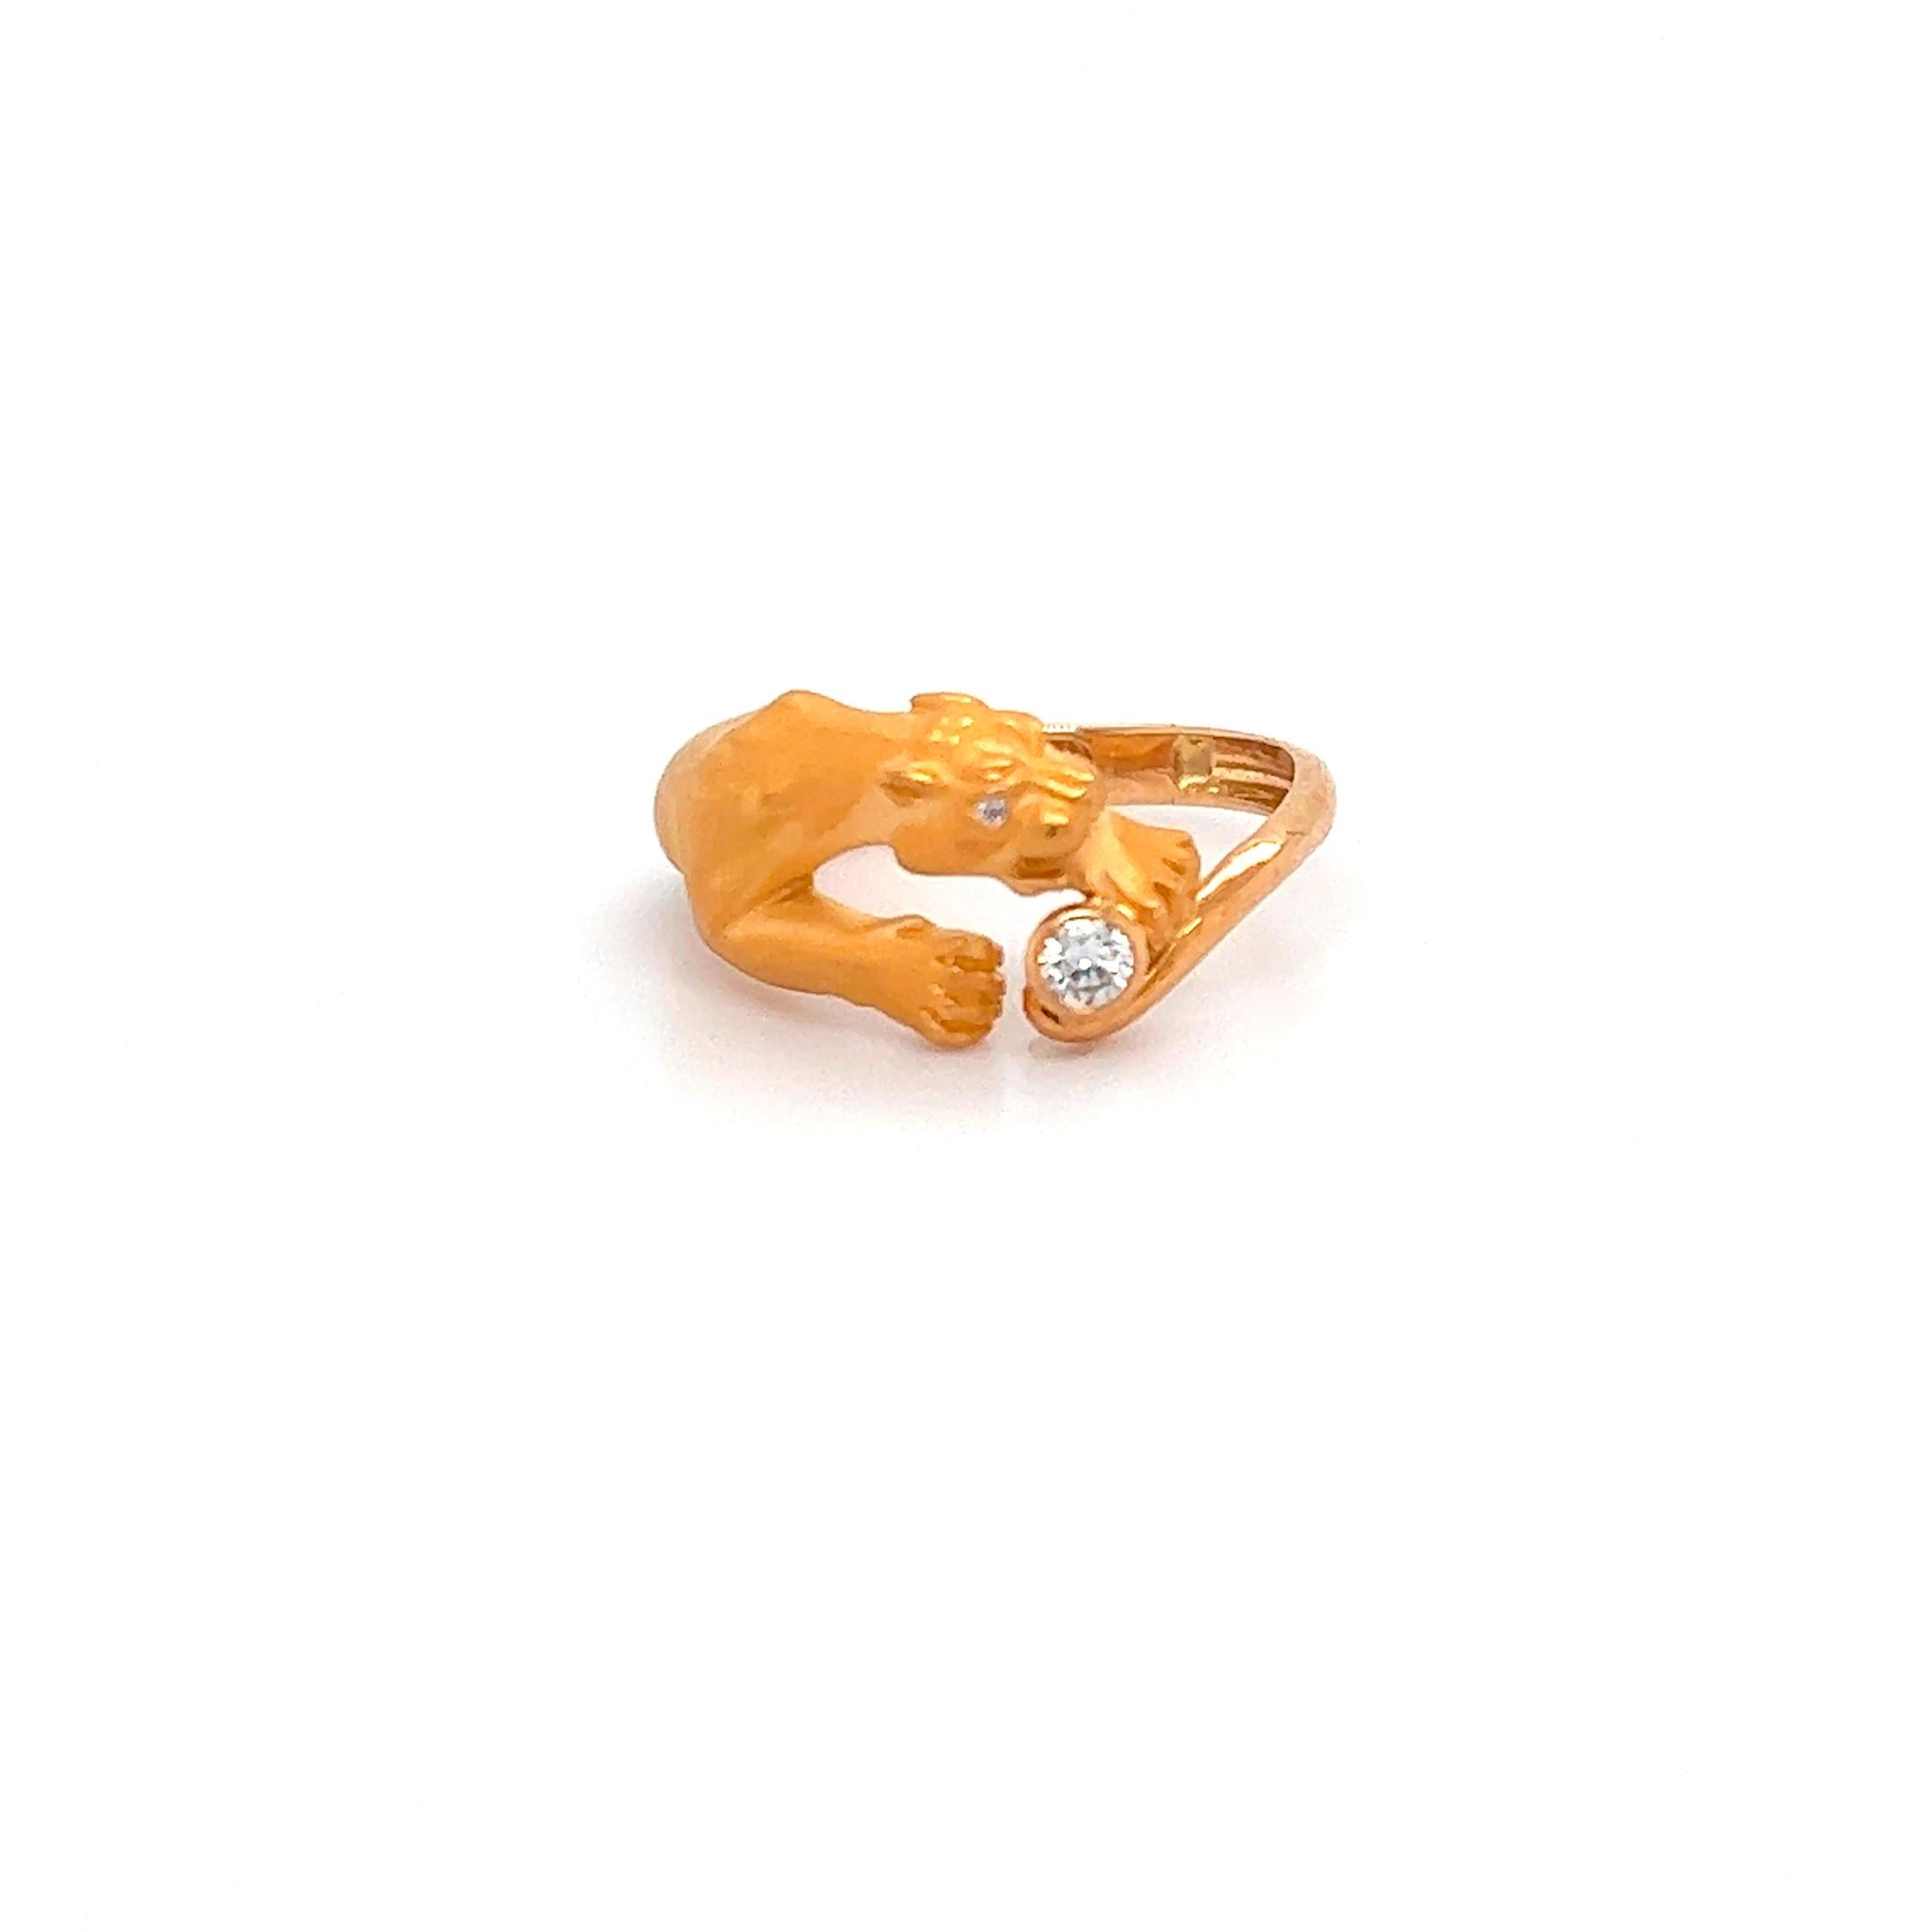 Beautiful ring crafted in 18k yellow gold by famed designer Carrera y Carrera. The elegant design depicts a Panther that wraps around your finger leading up to one bezel set earth mined natural diamond. 
Carrera y Carrera showcases different polish